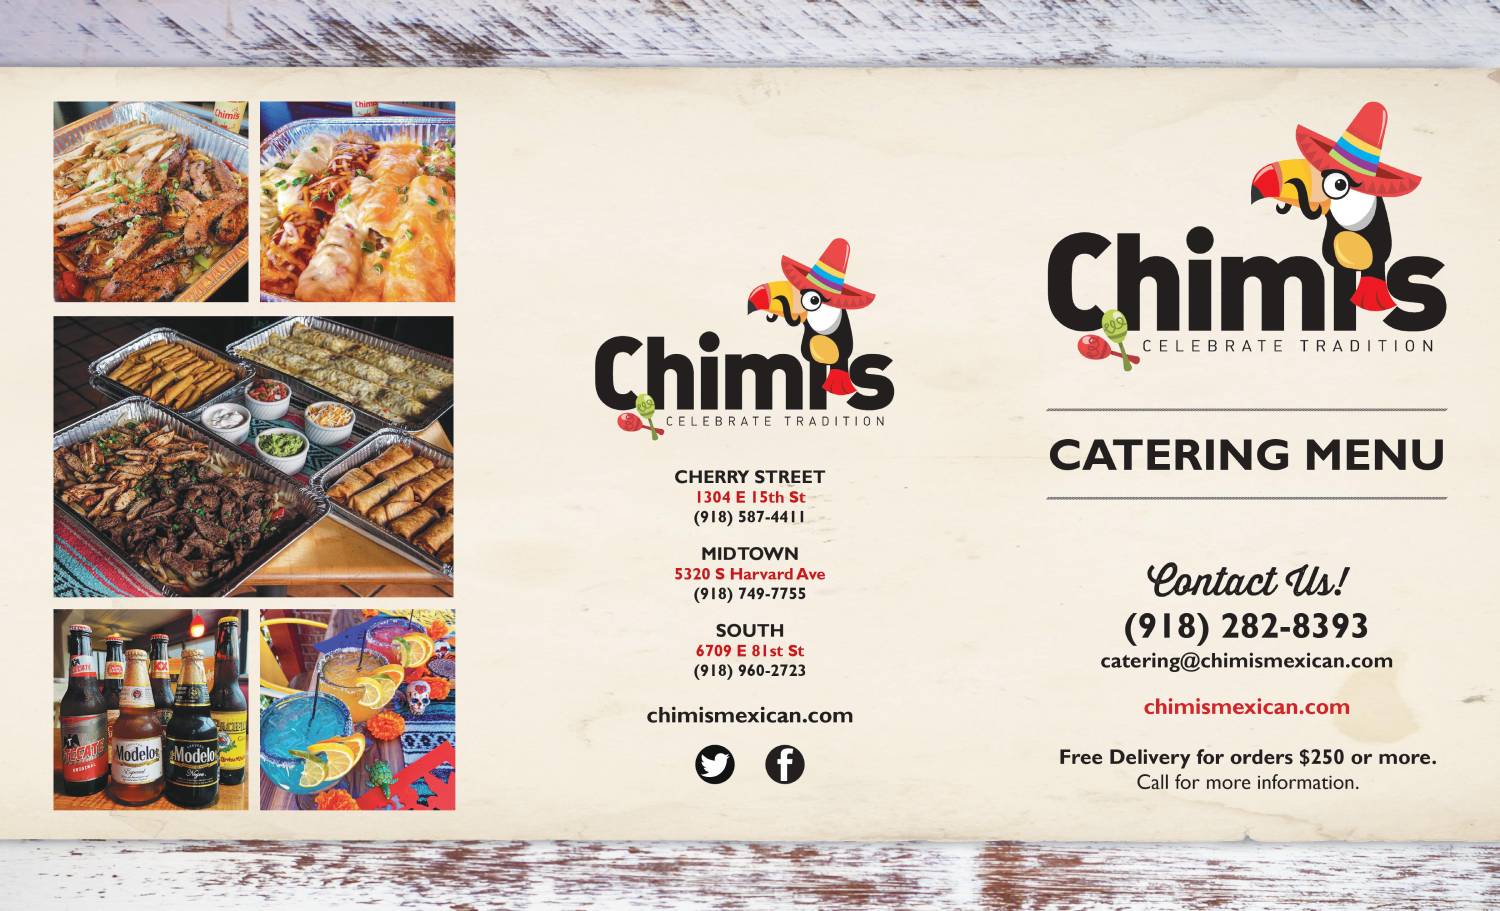 Chimi's Catering Menu - Page 1